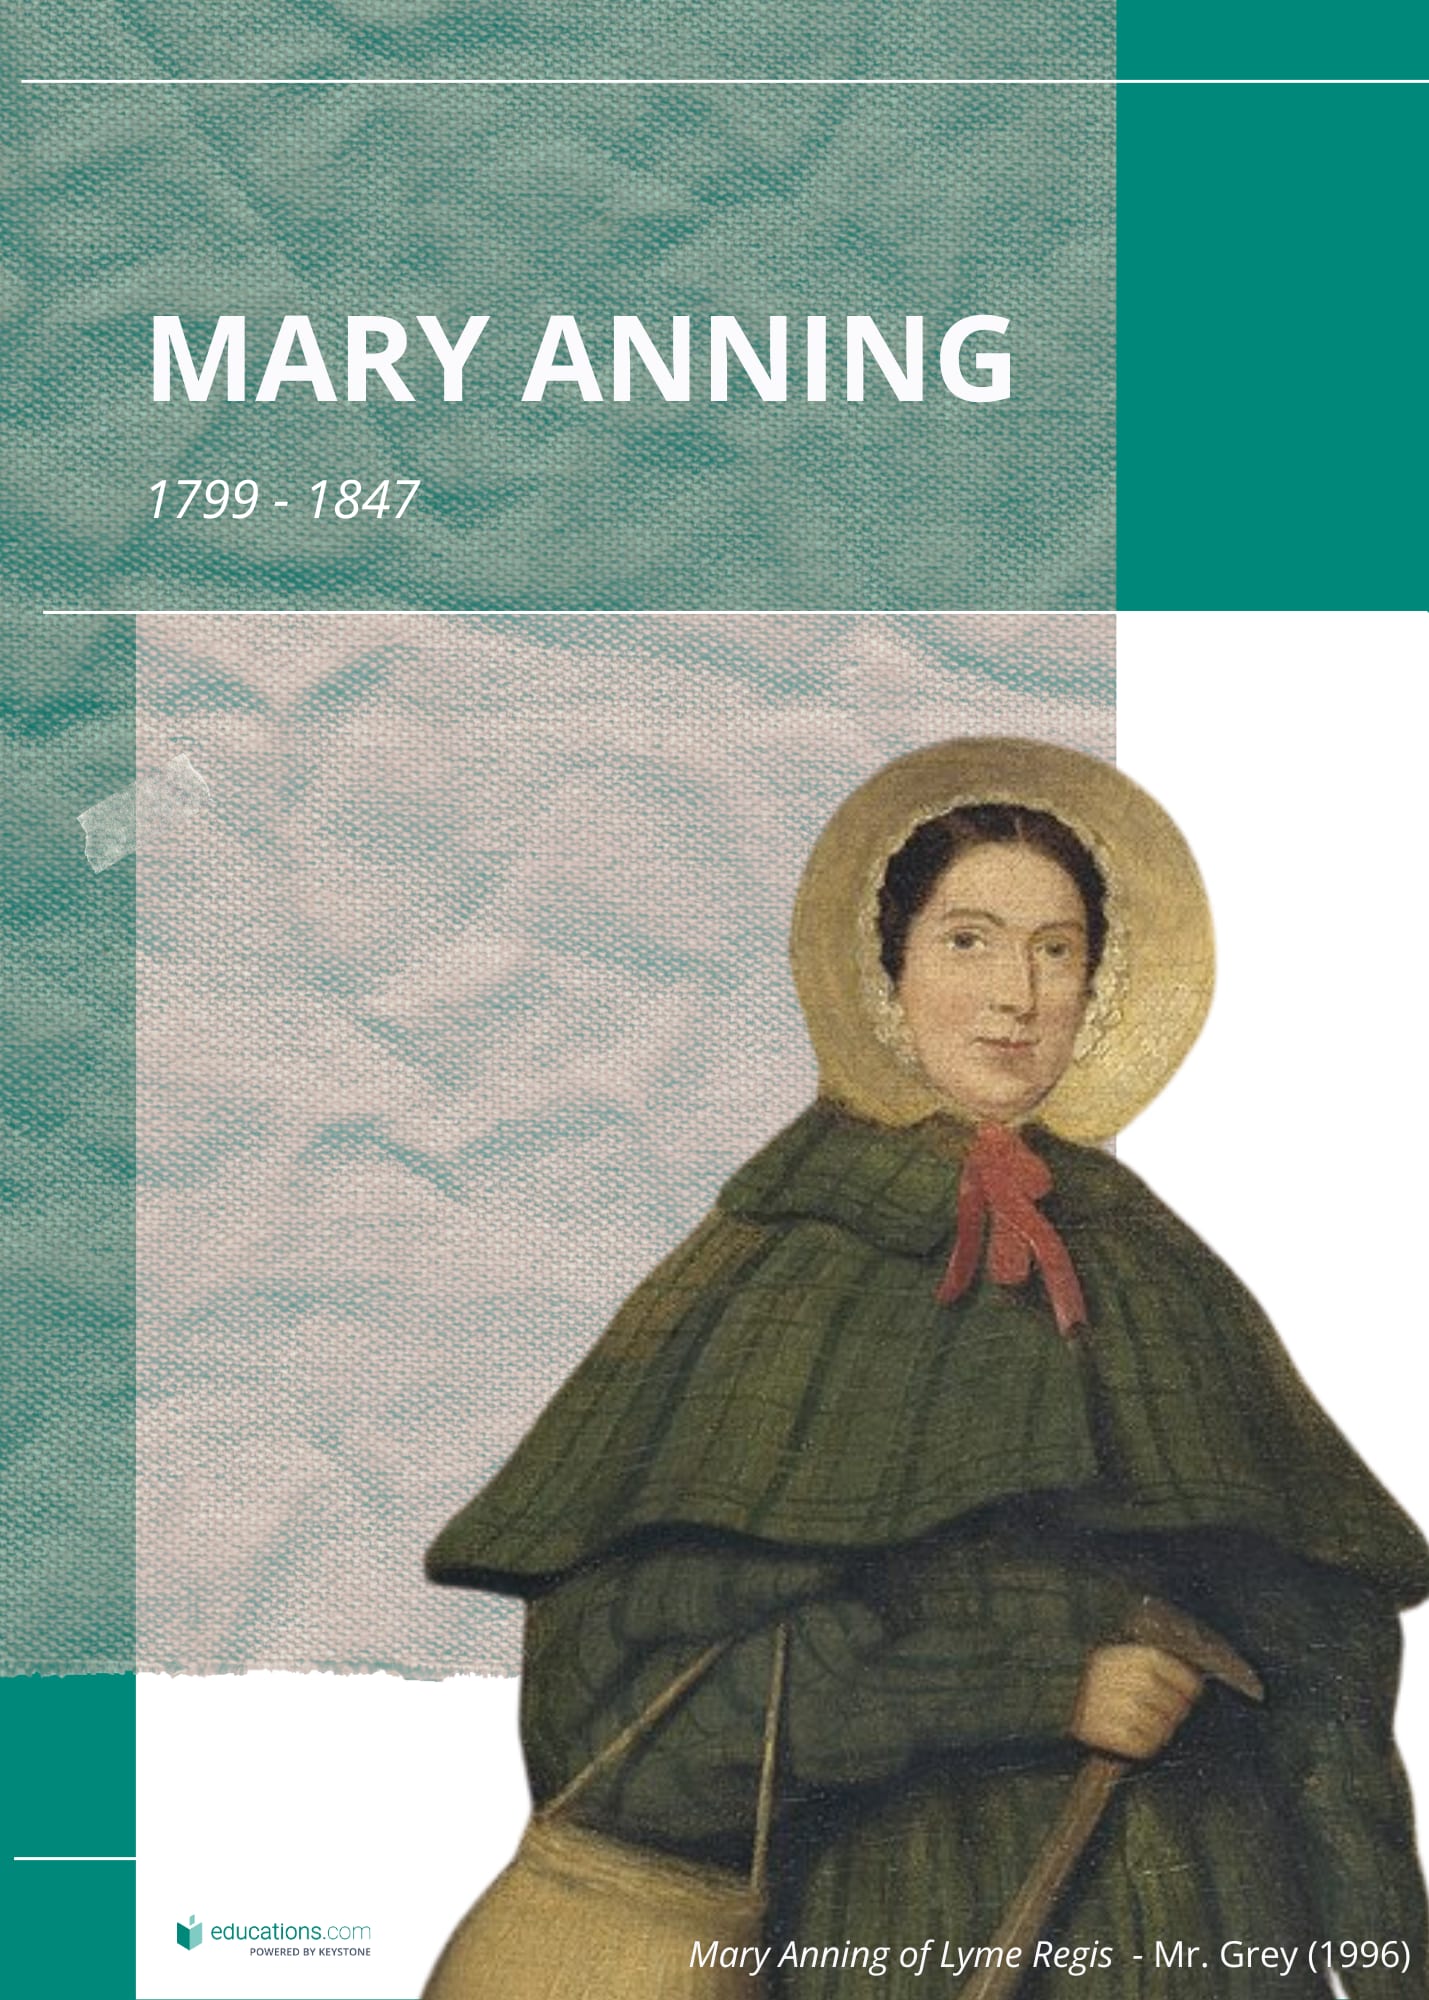 Women who changed the world: Mary Anning